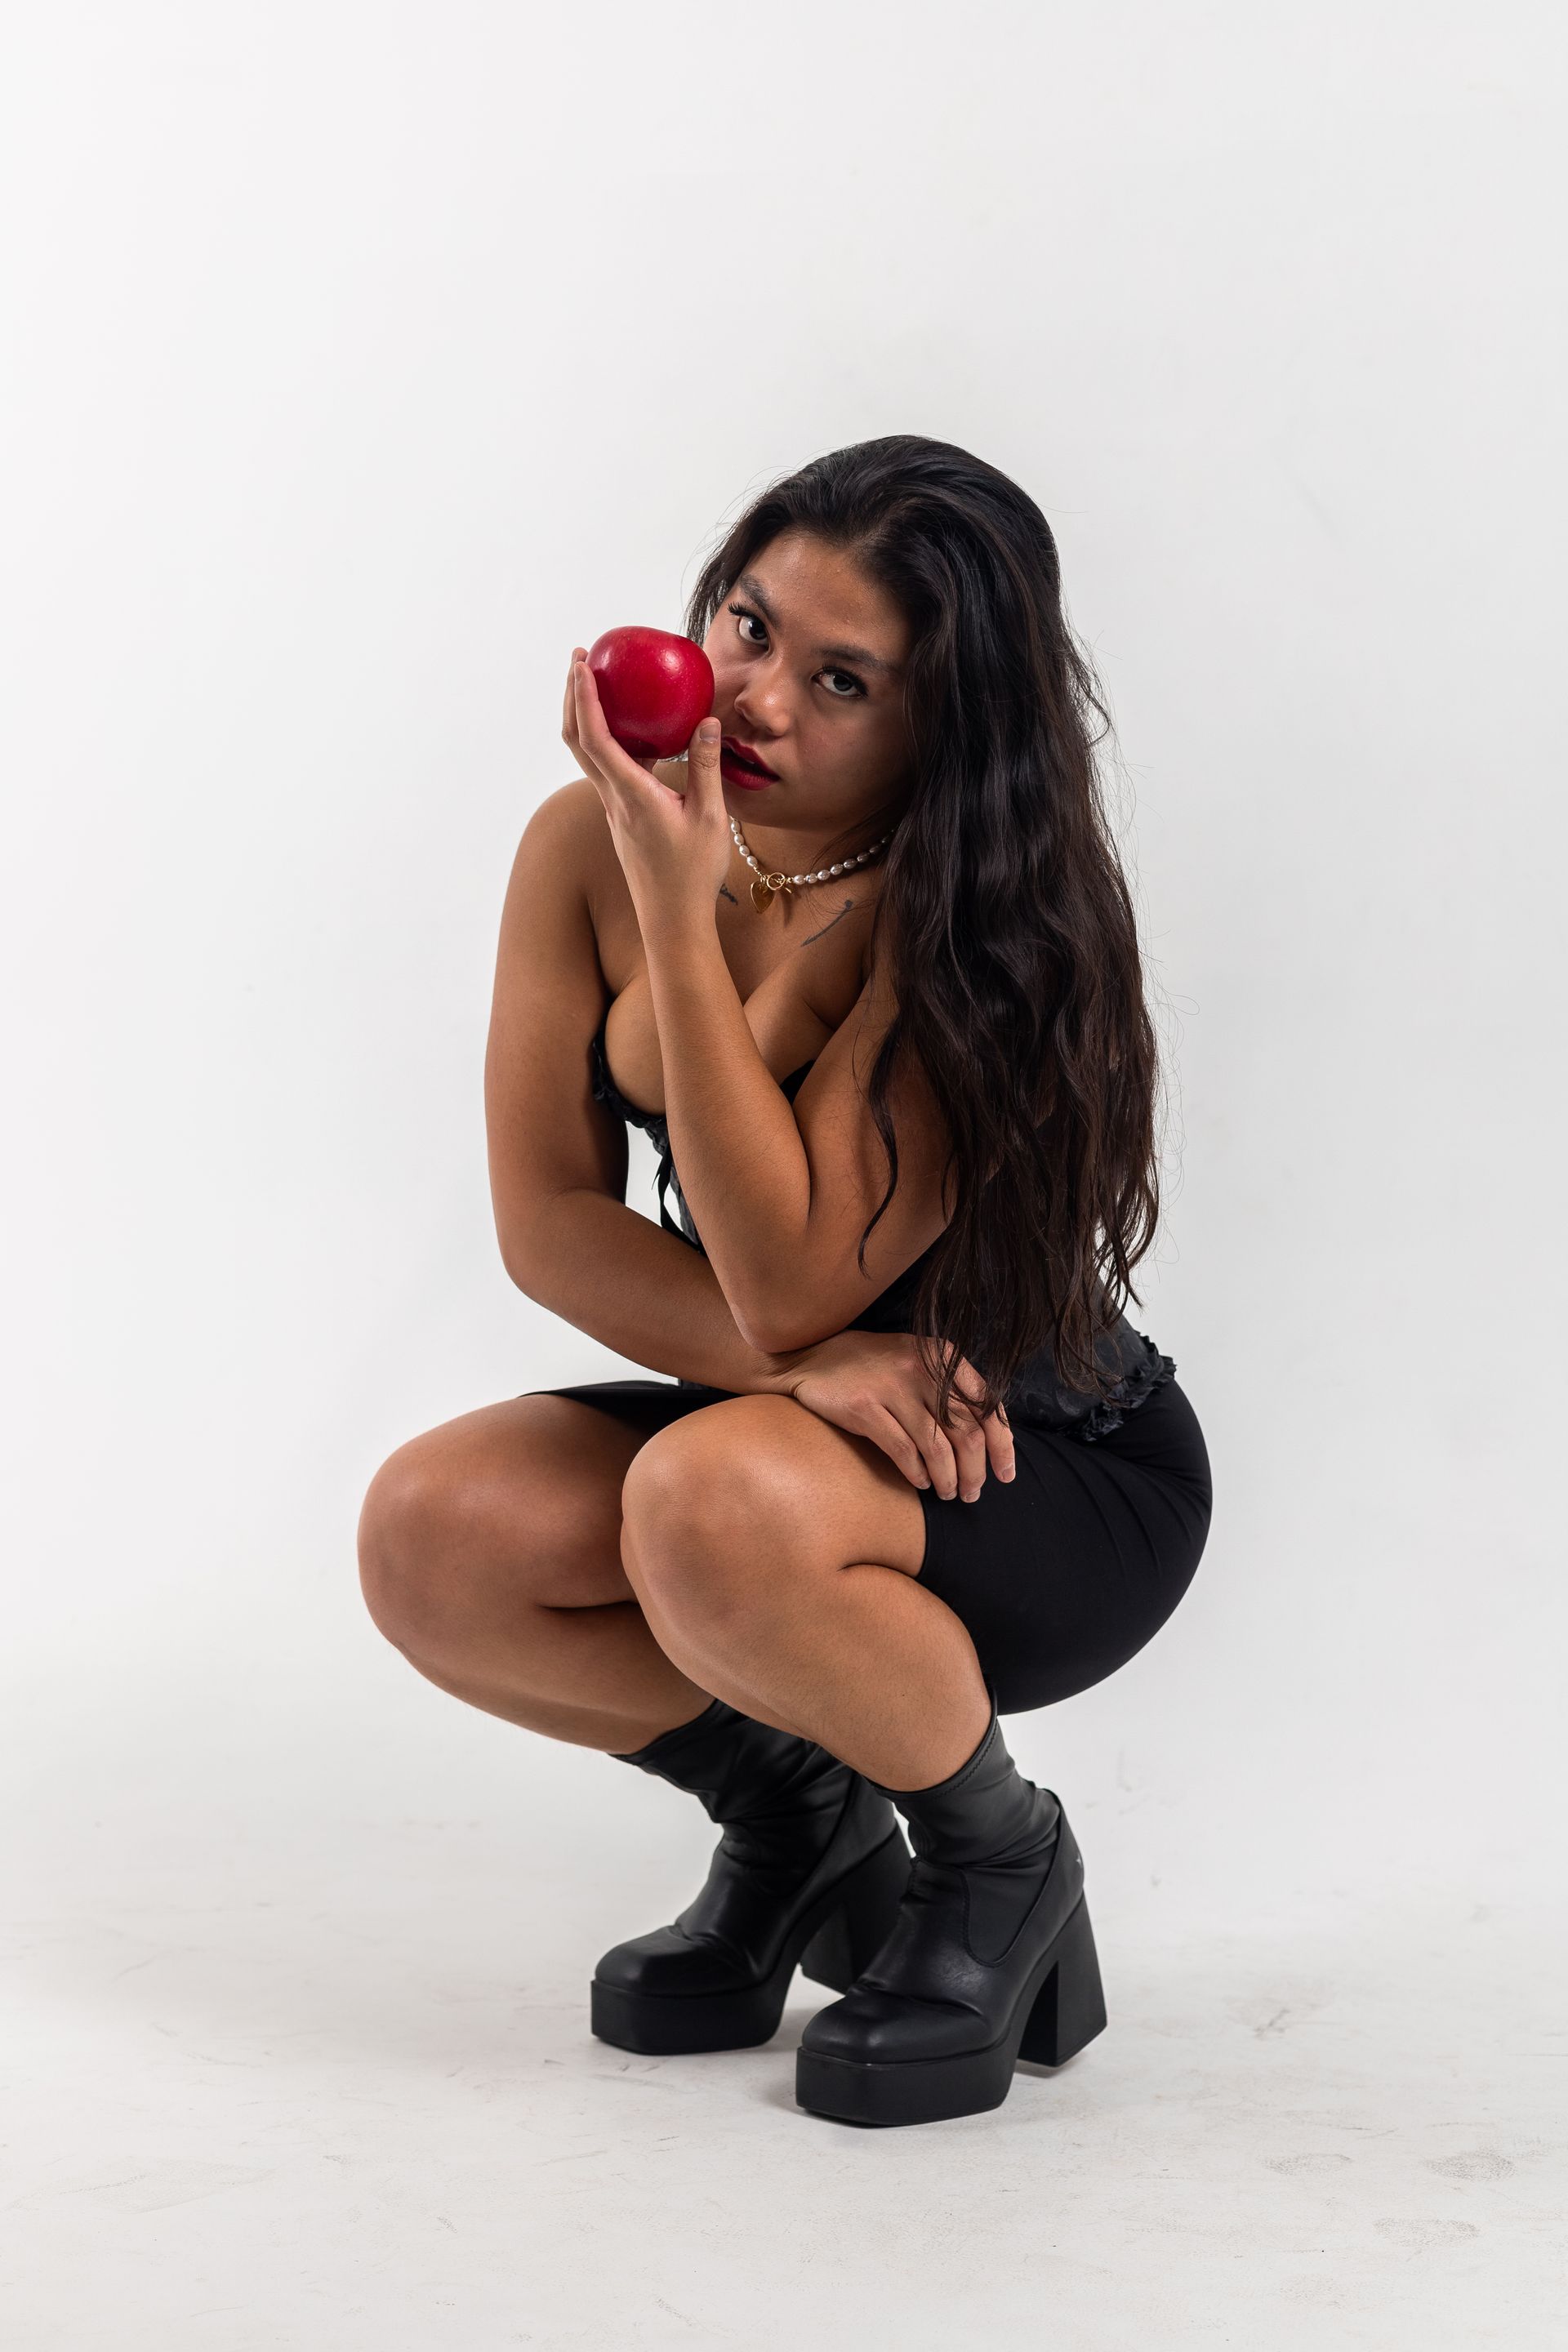 a woman is squatting down while holding a red apple in her hand .